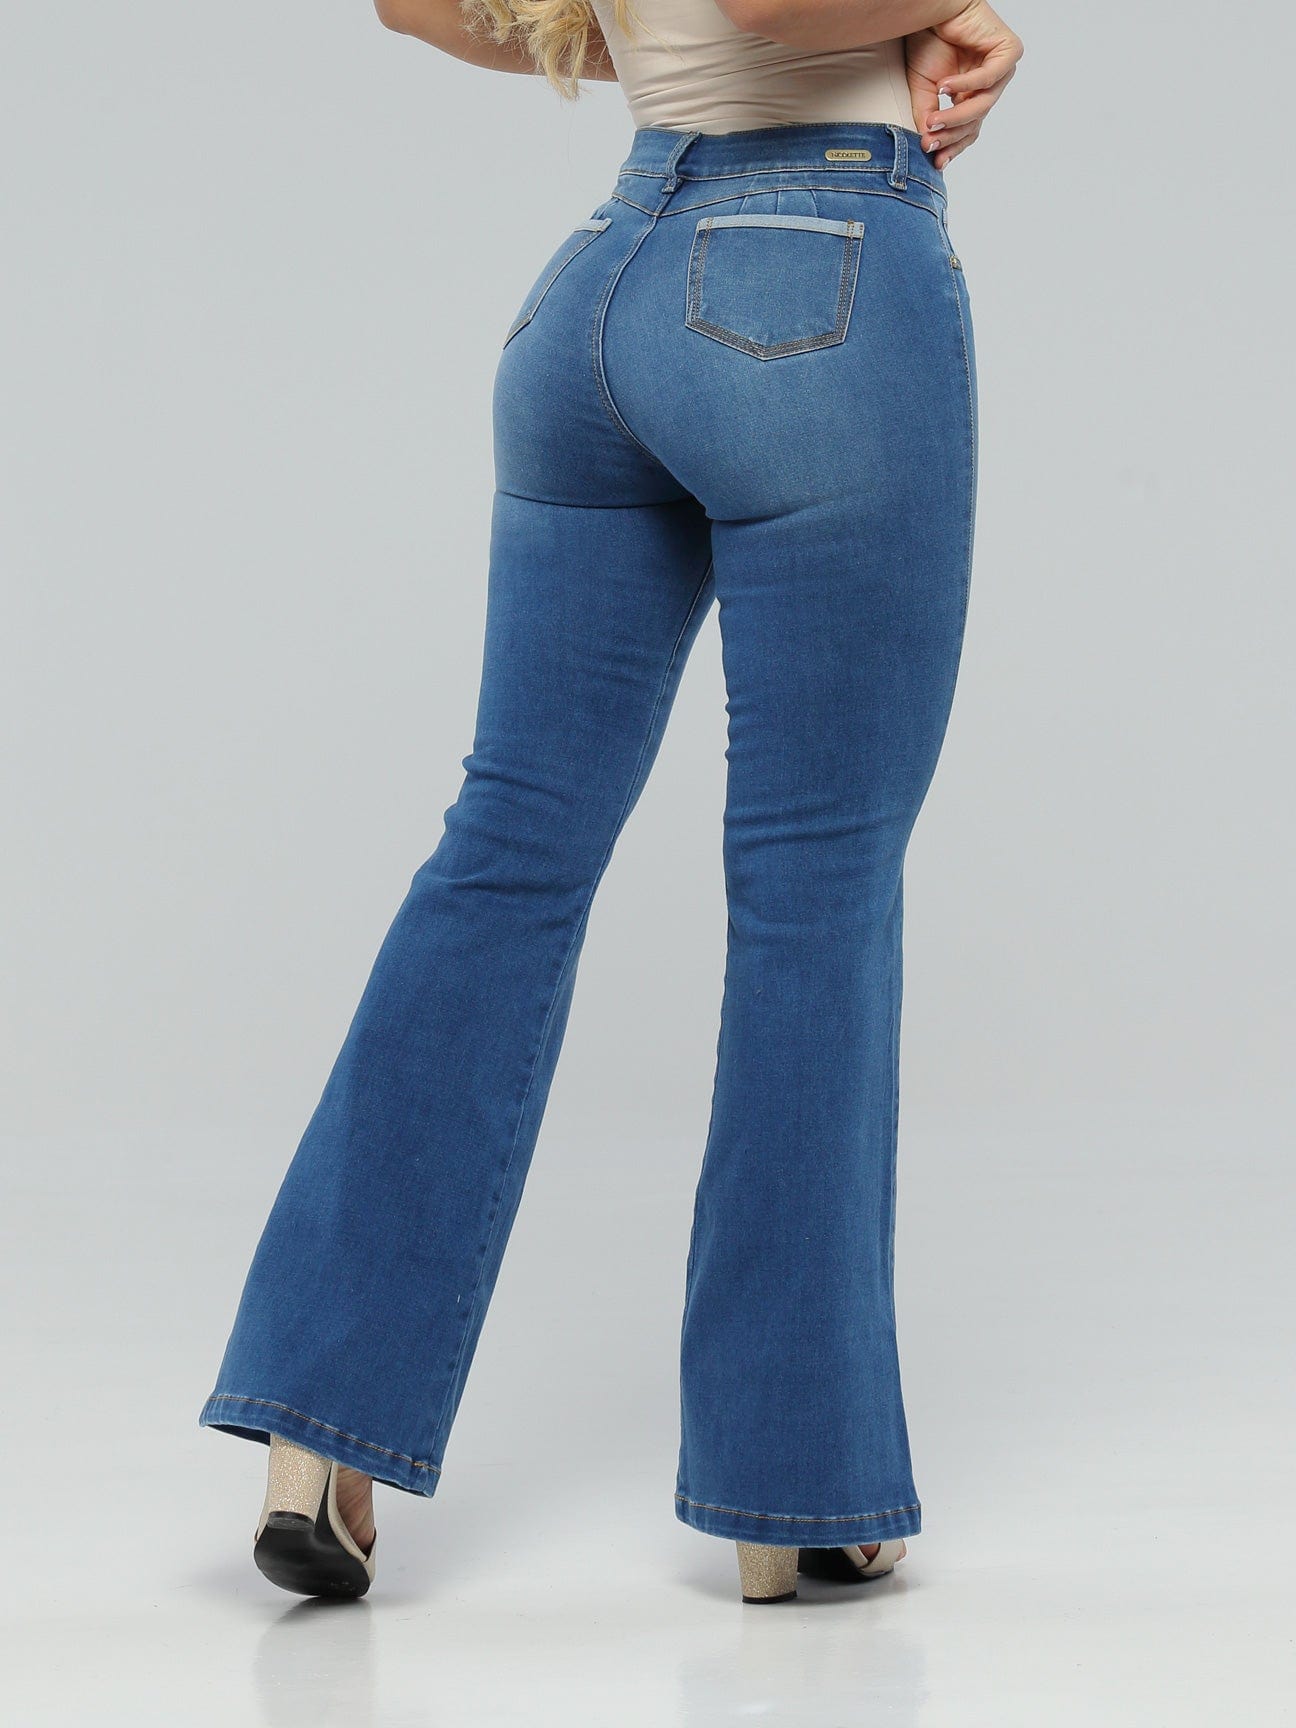 Ace of Hearts Butt Lift Jeans 14262